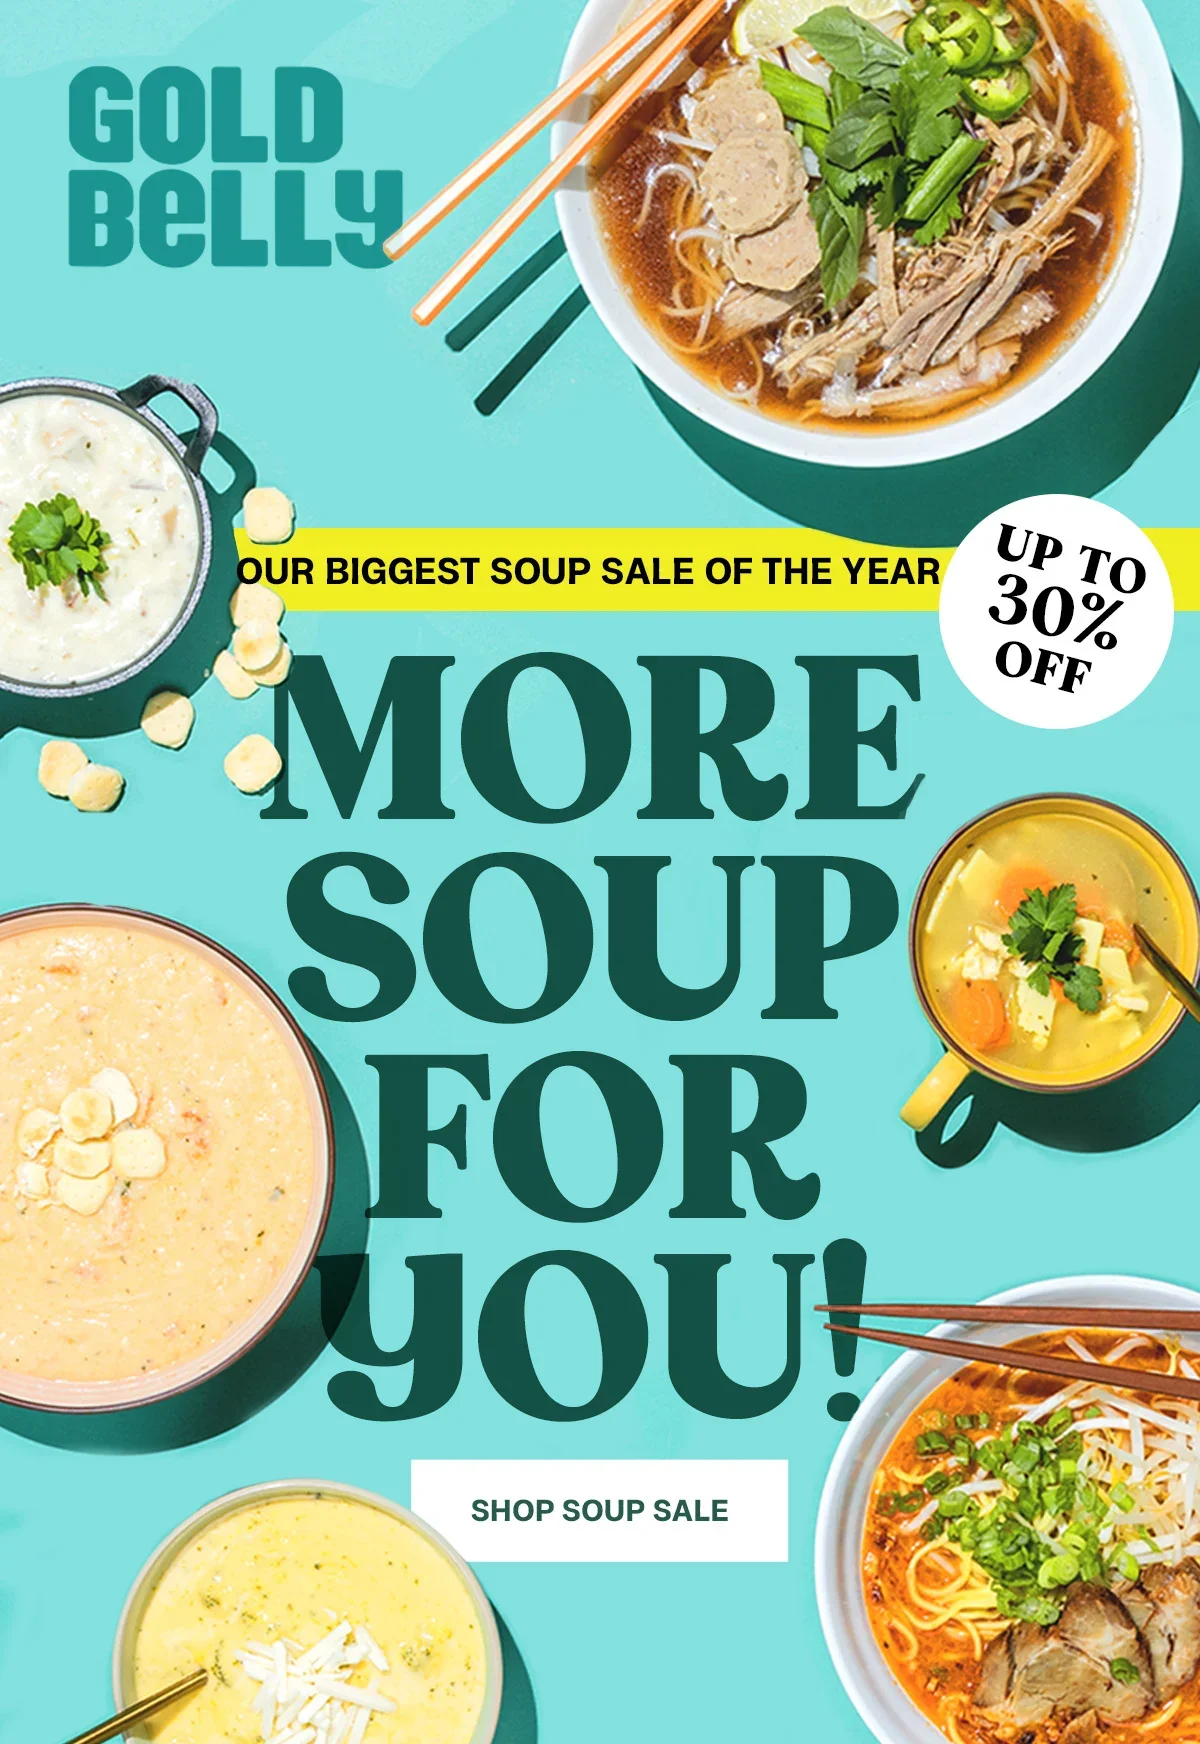 Our Biggest Soup Sale of the Year